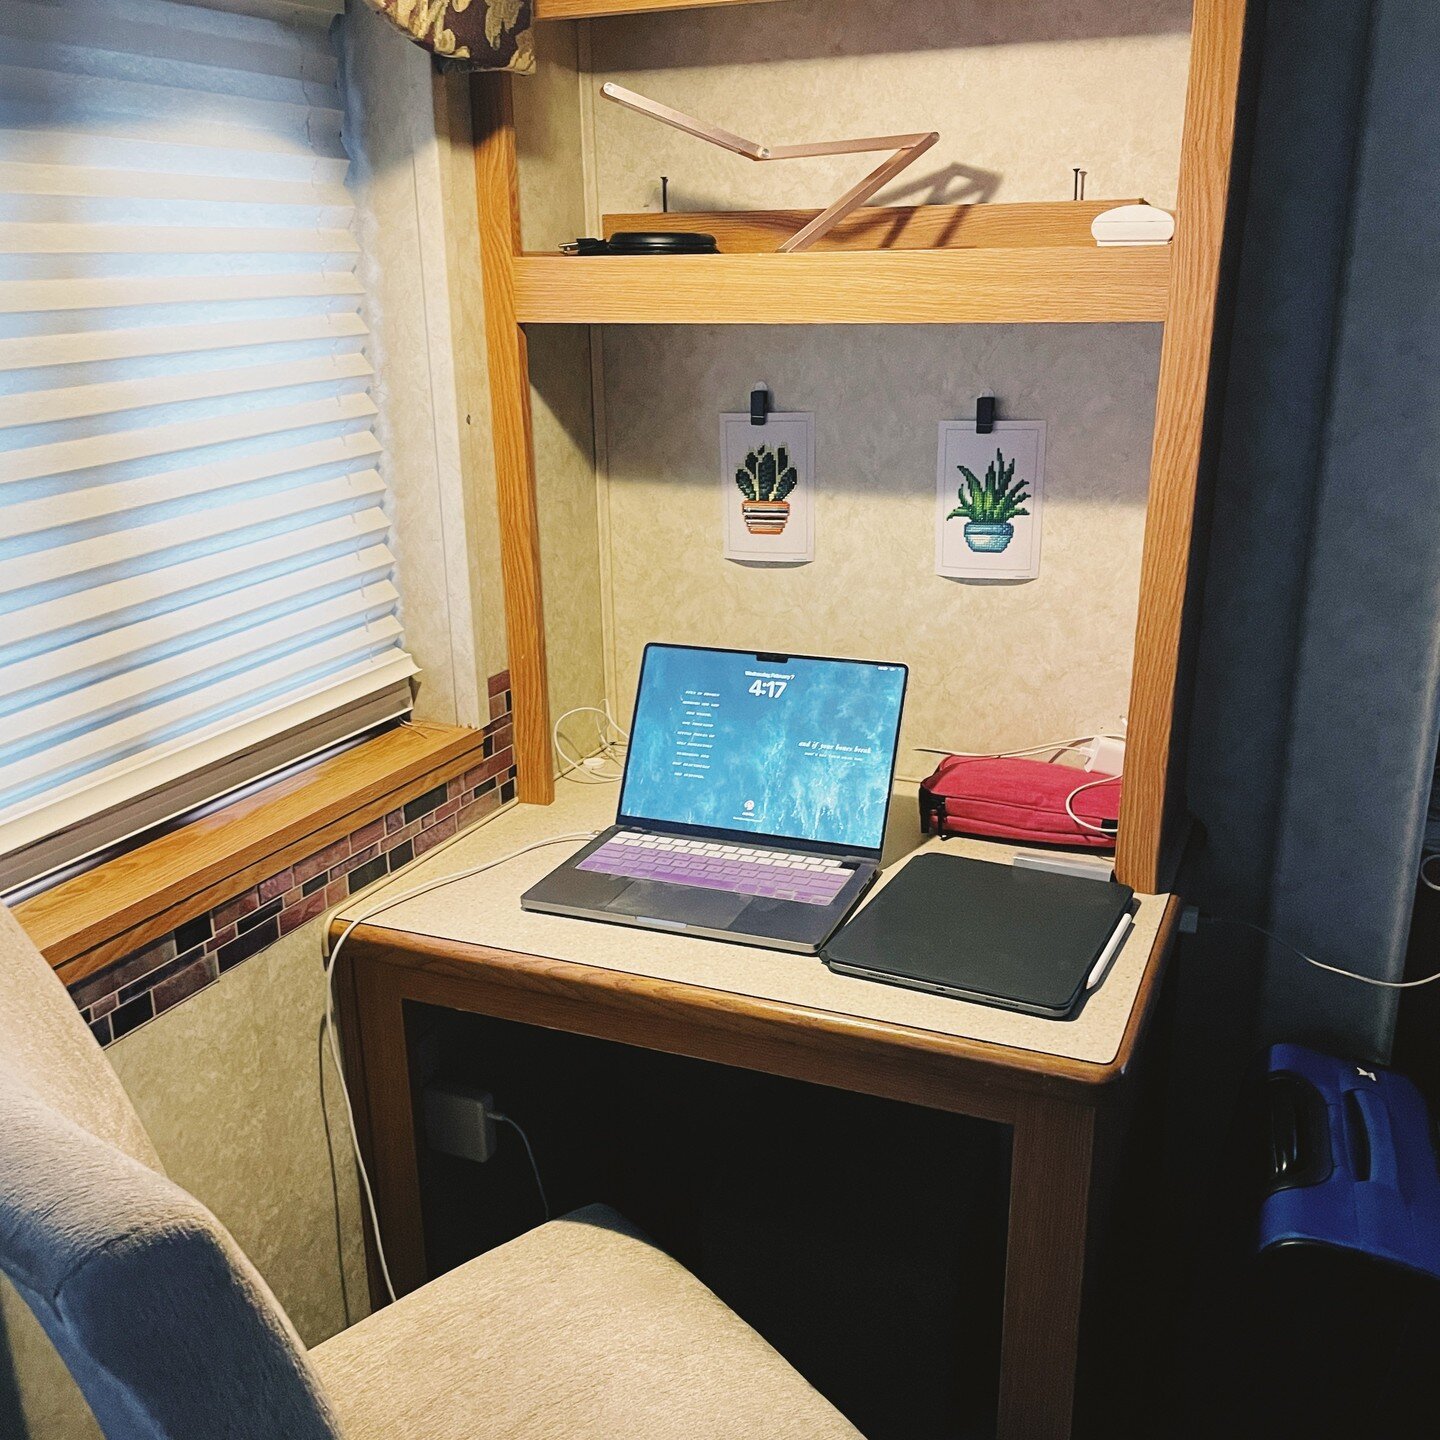 When you are serious about attending #horrorclub with Gareth at @autocritediting 🤣 Yes, this desk WAS the main selling point of buying this camper much to my husband's dismay. 

Side note: exciting things are brewing ;) 
#camplife #rvlife #workingon